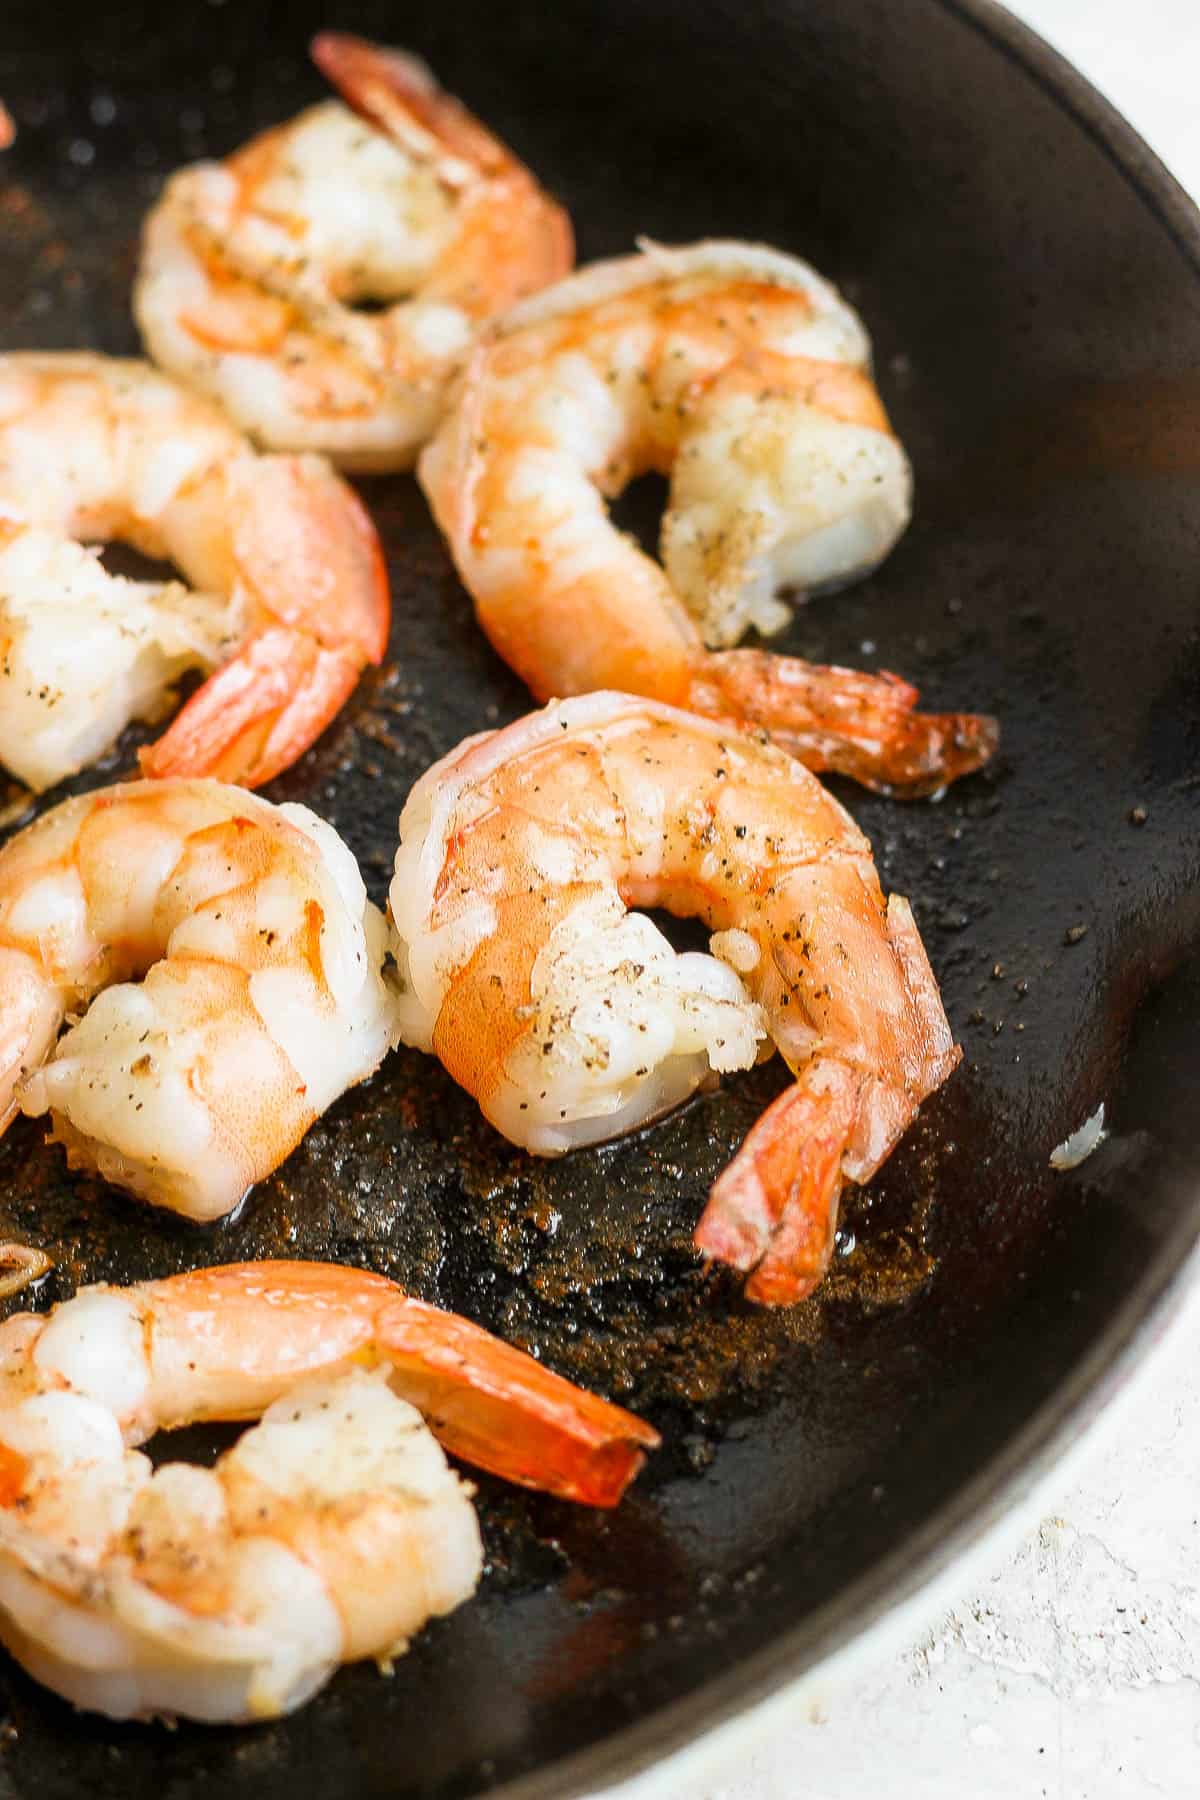 Shrimp being cooked in a cast iron skillet.